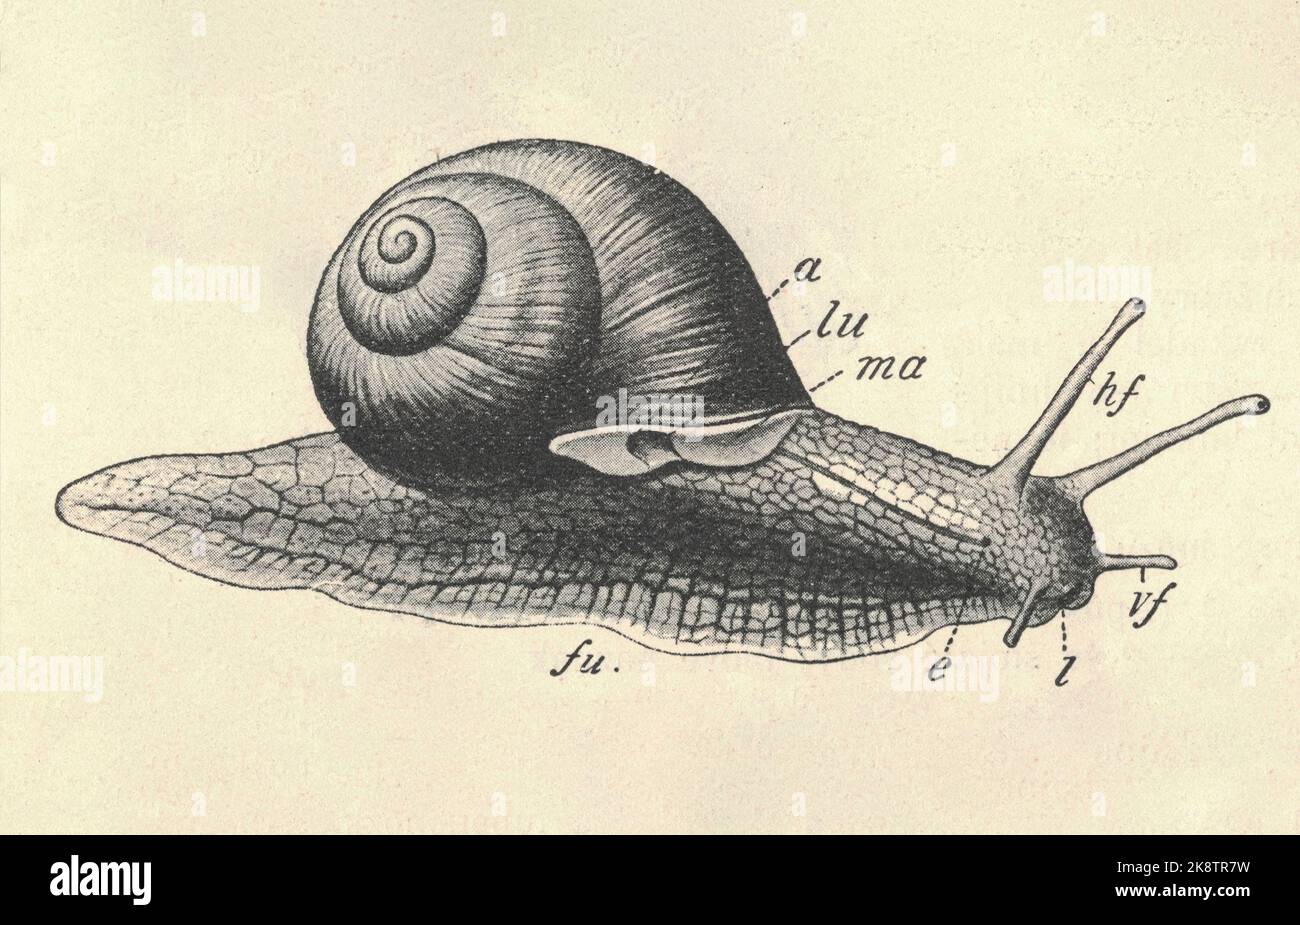 Antique engraved illustration of the Roman snail. Vintage illustration of the Burgundy snail. Old engraved picture of the escargot. Picture of the Helix pomatia. Book illustration published 1907. Helix pomatia, common names the Roman snail, Burgundy snail, or escargot, is a species of large, edible, air-breathing land snail, a pulmonate gastropod terrestrial mollusc in the family Helicidae. It is one of Europe's biggest species of land snail. Stock Photo